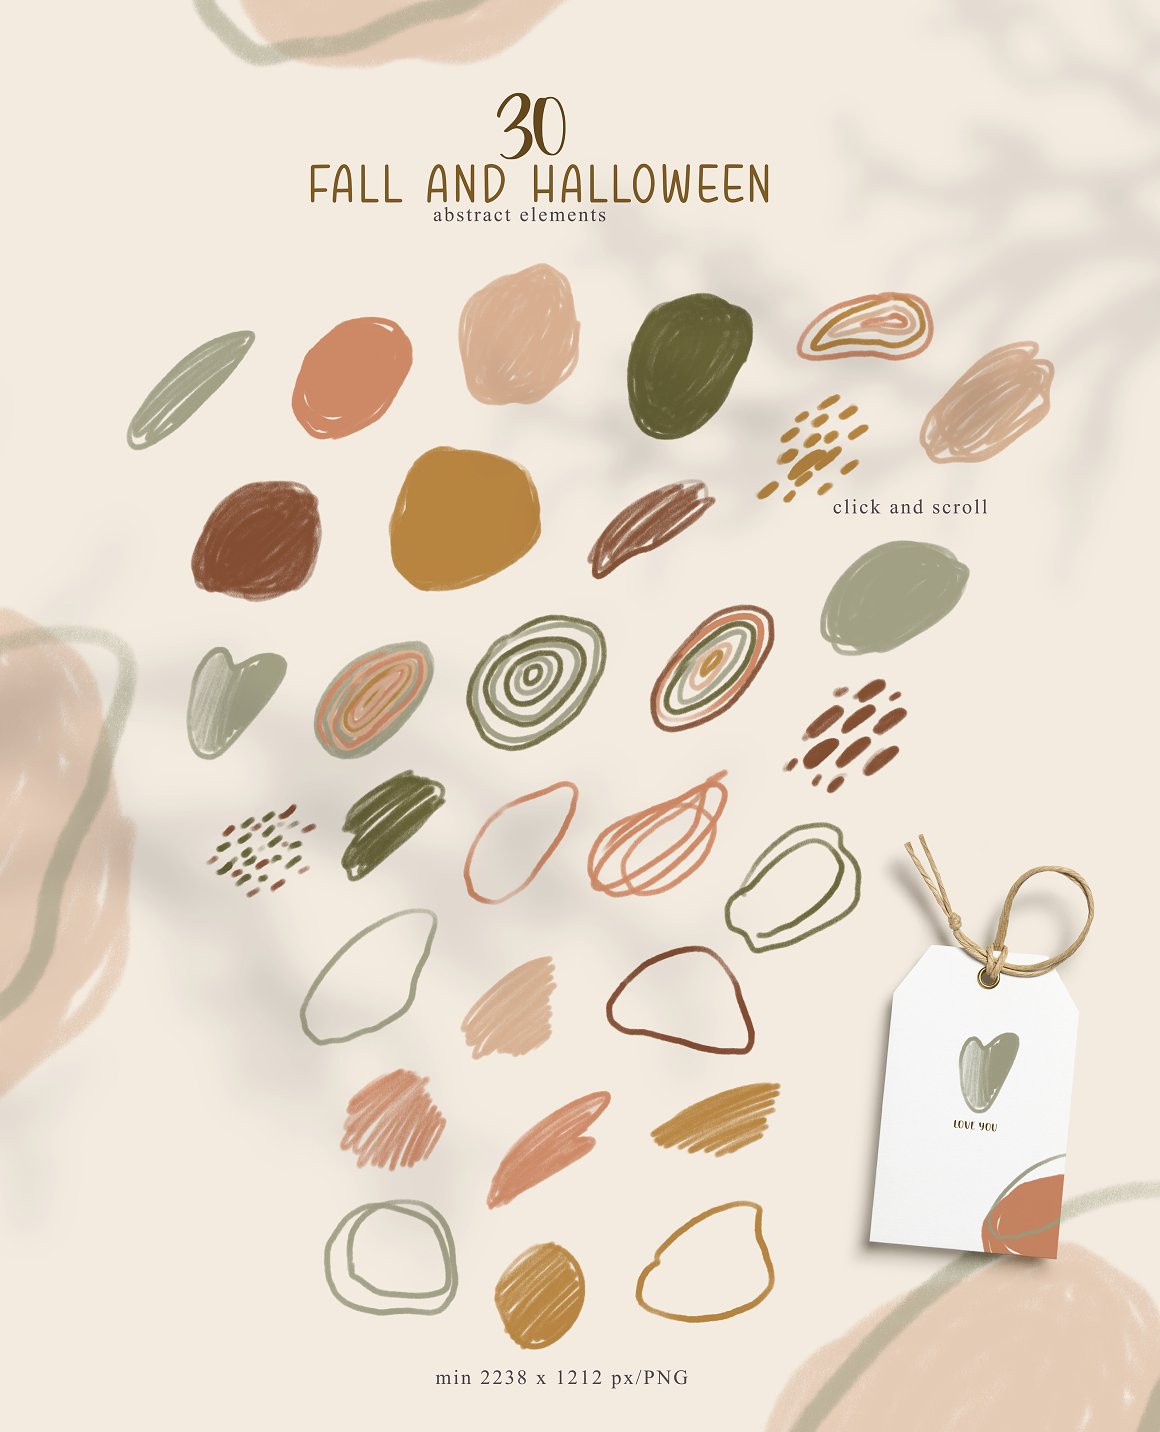 Clipart of 30 fall and halloween abstract elements.